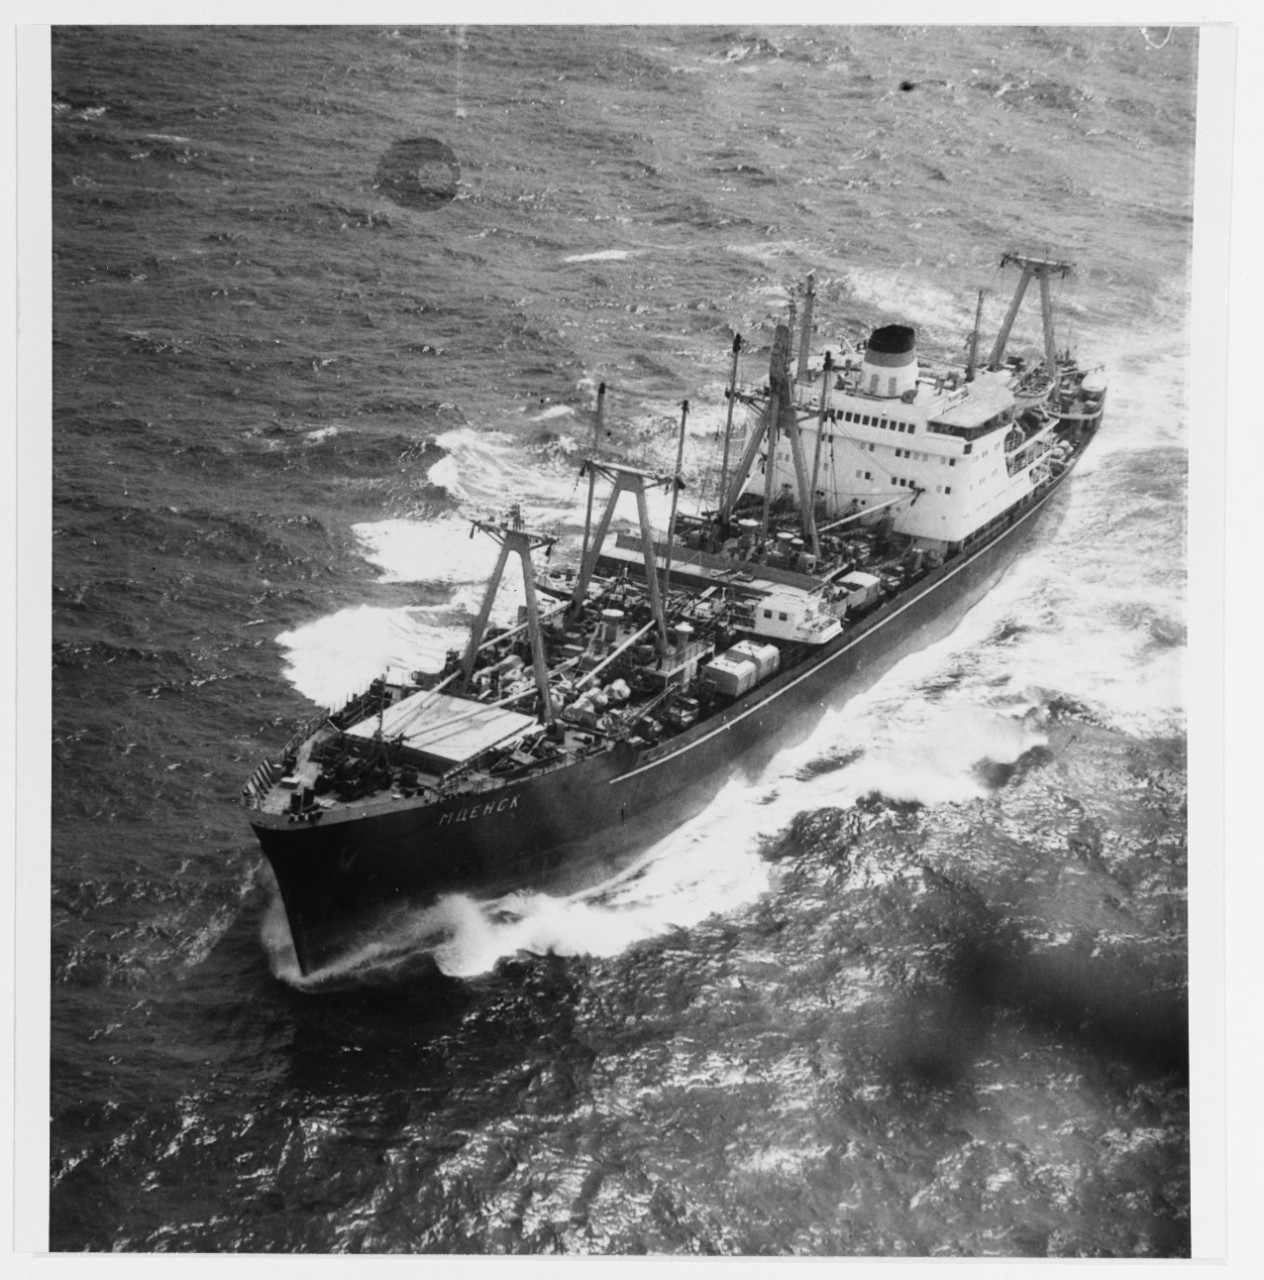 Frank E. Evans helps track ships such as Soviet freighter Mtsensk, seen here en route to Haiphong to supply the North Vietnamese, 7 November 1967. An aircraft flying from Kearsarge photographs the ship, her deck piled high with contraband cargo i...